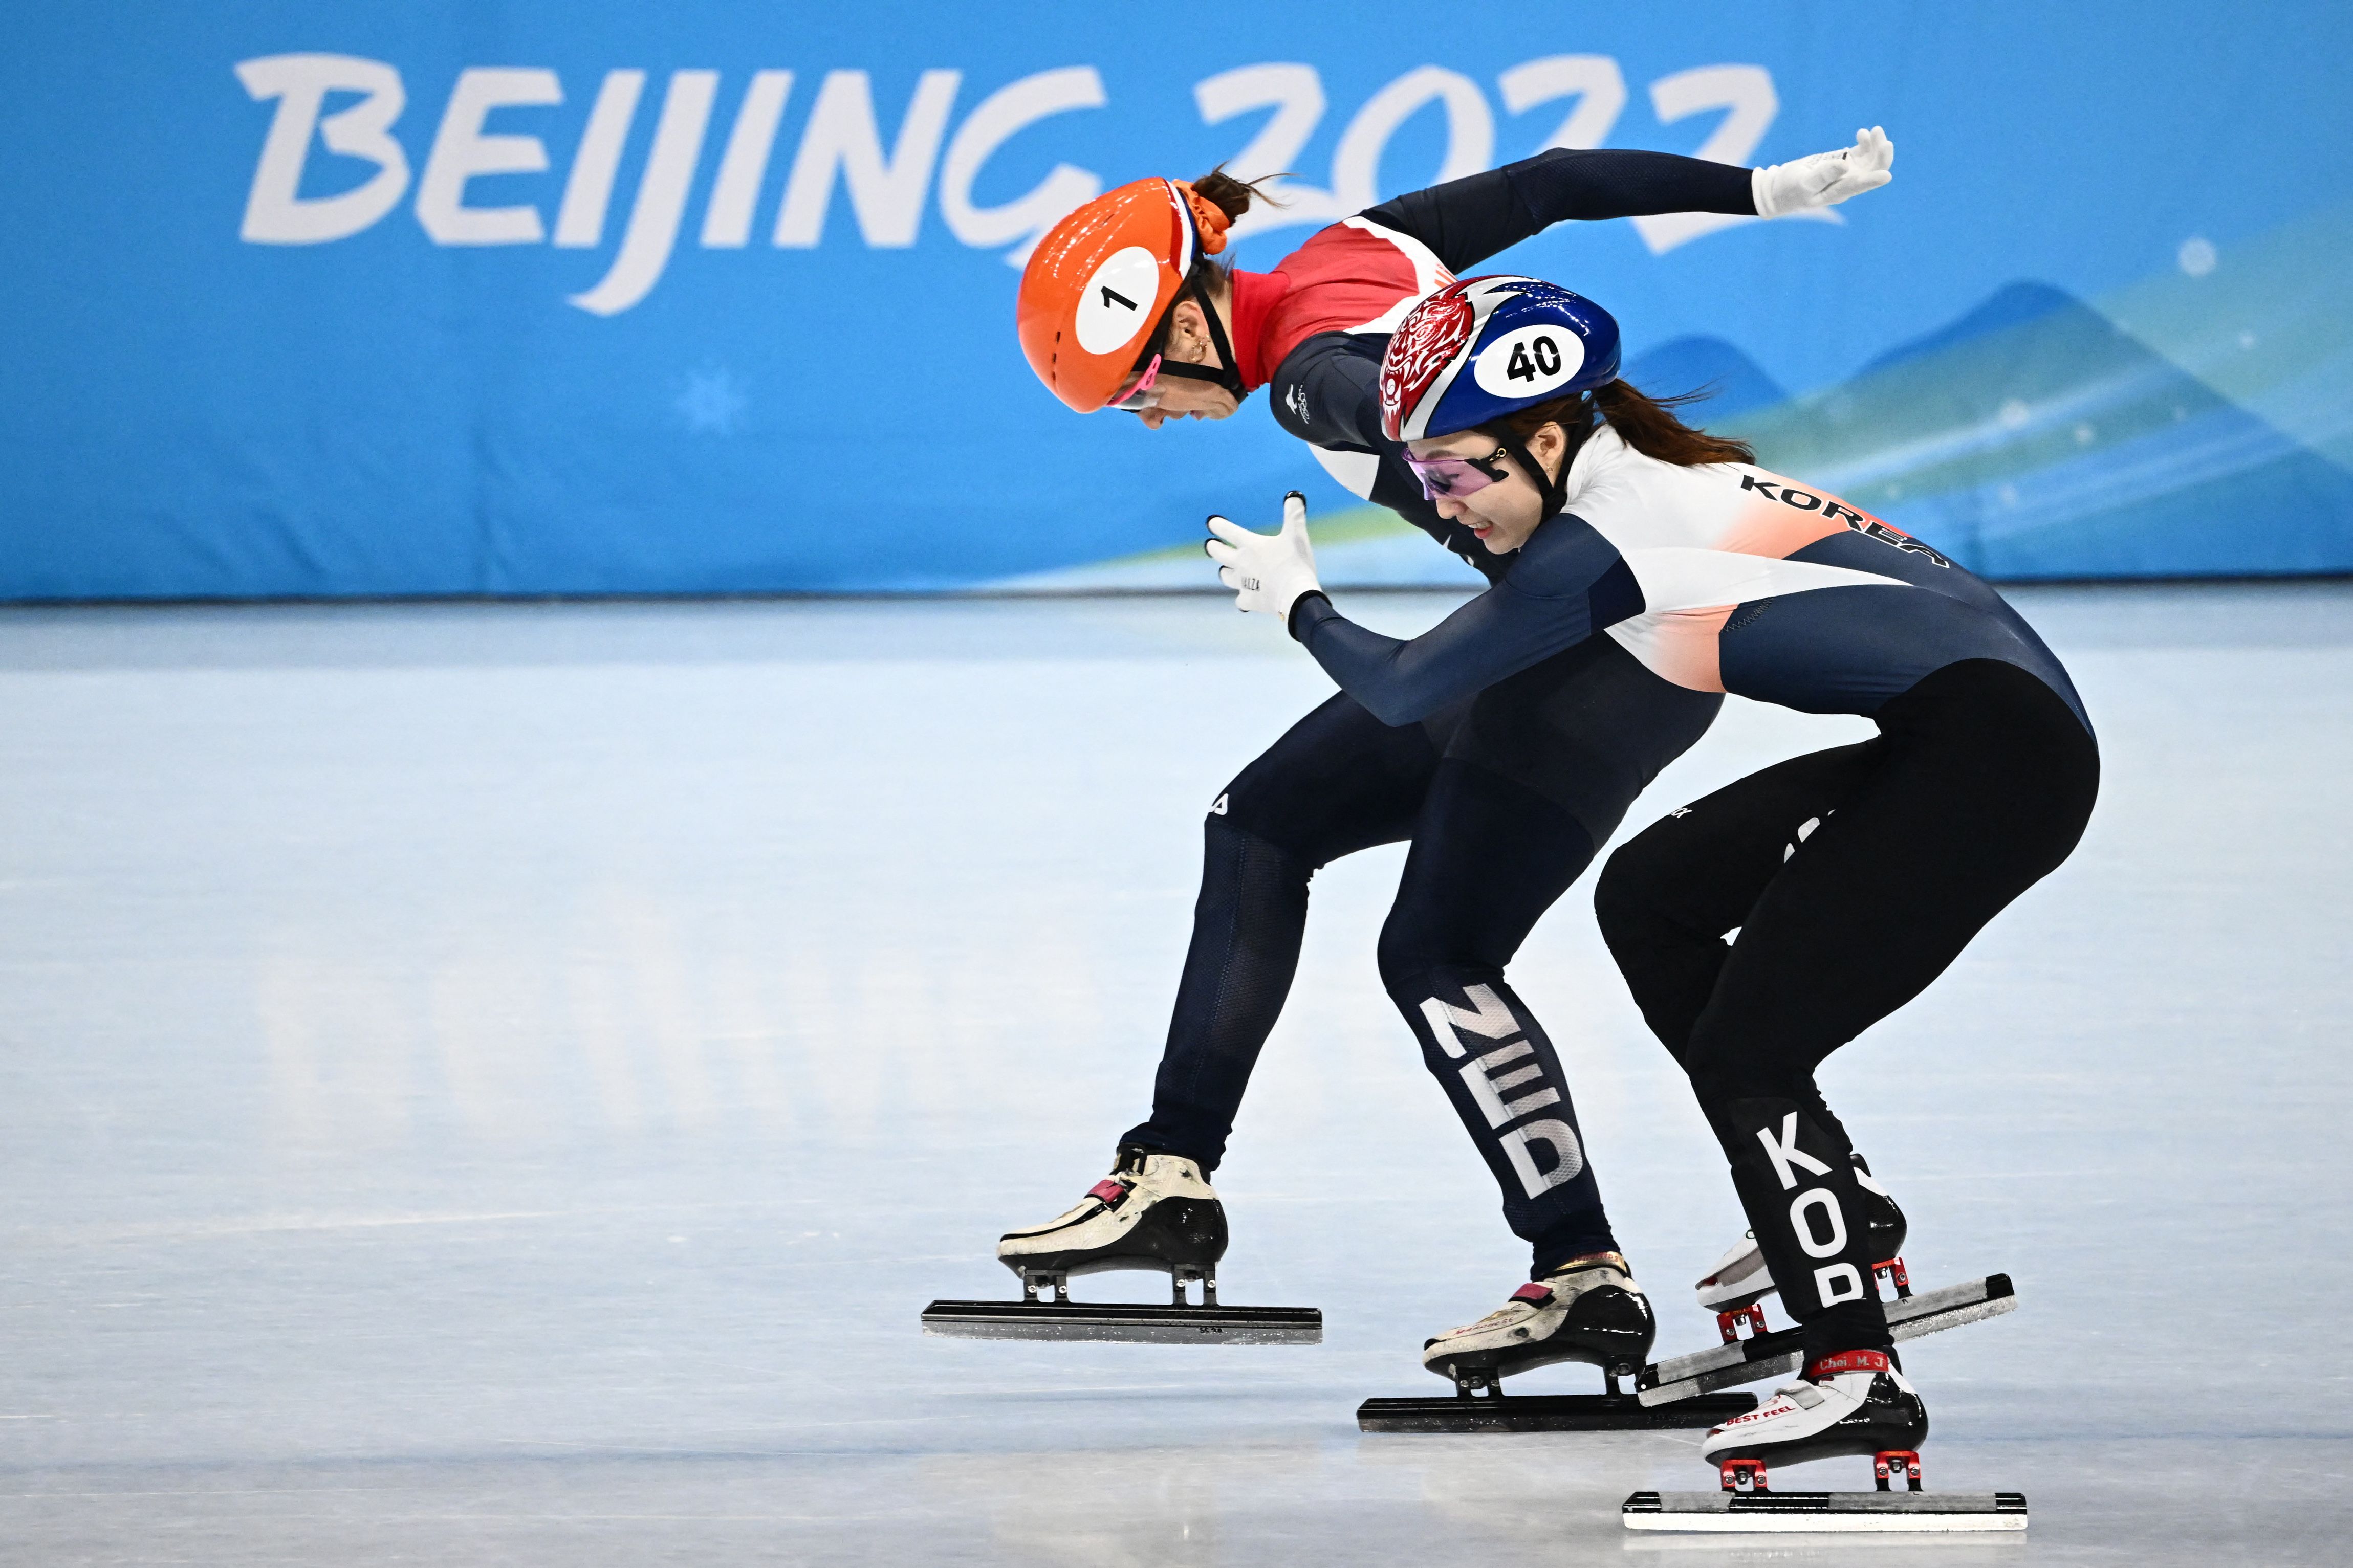 Netherlands' Suzanne Schulting crosses the finish line just ahead of South Korea's Choi Min-jeong in the final of the women's 1,000m short track speed skating event on February 11.